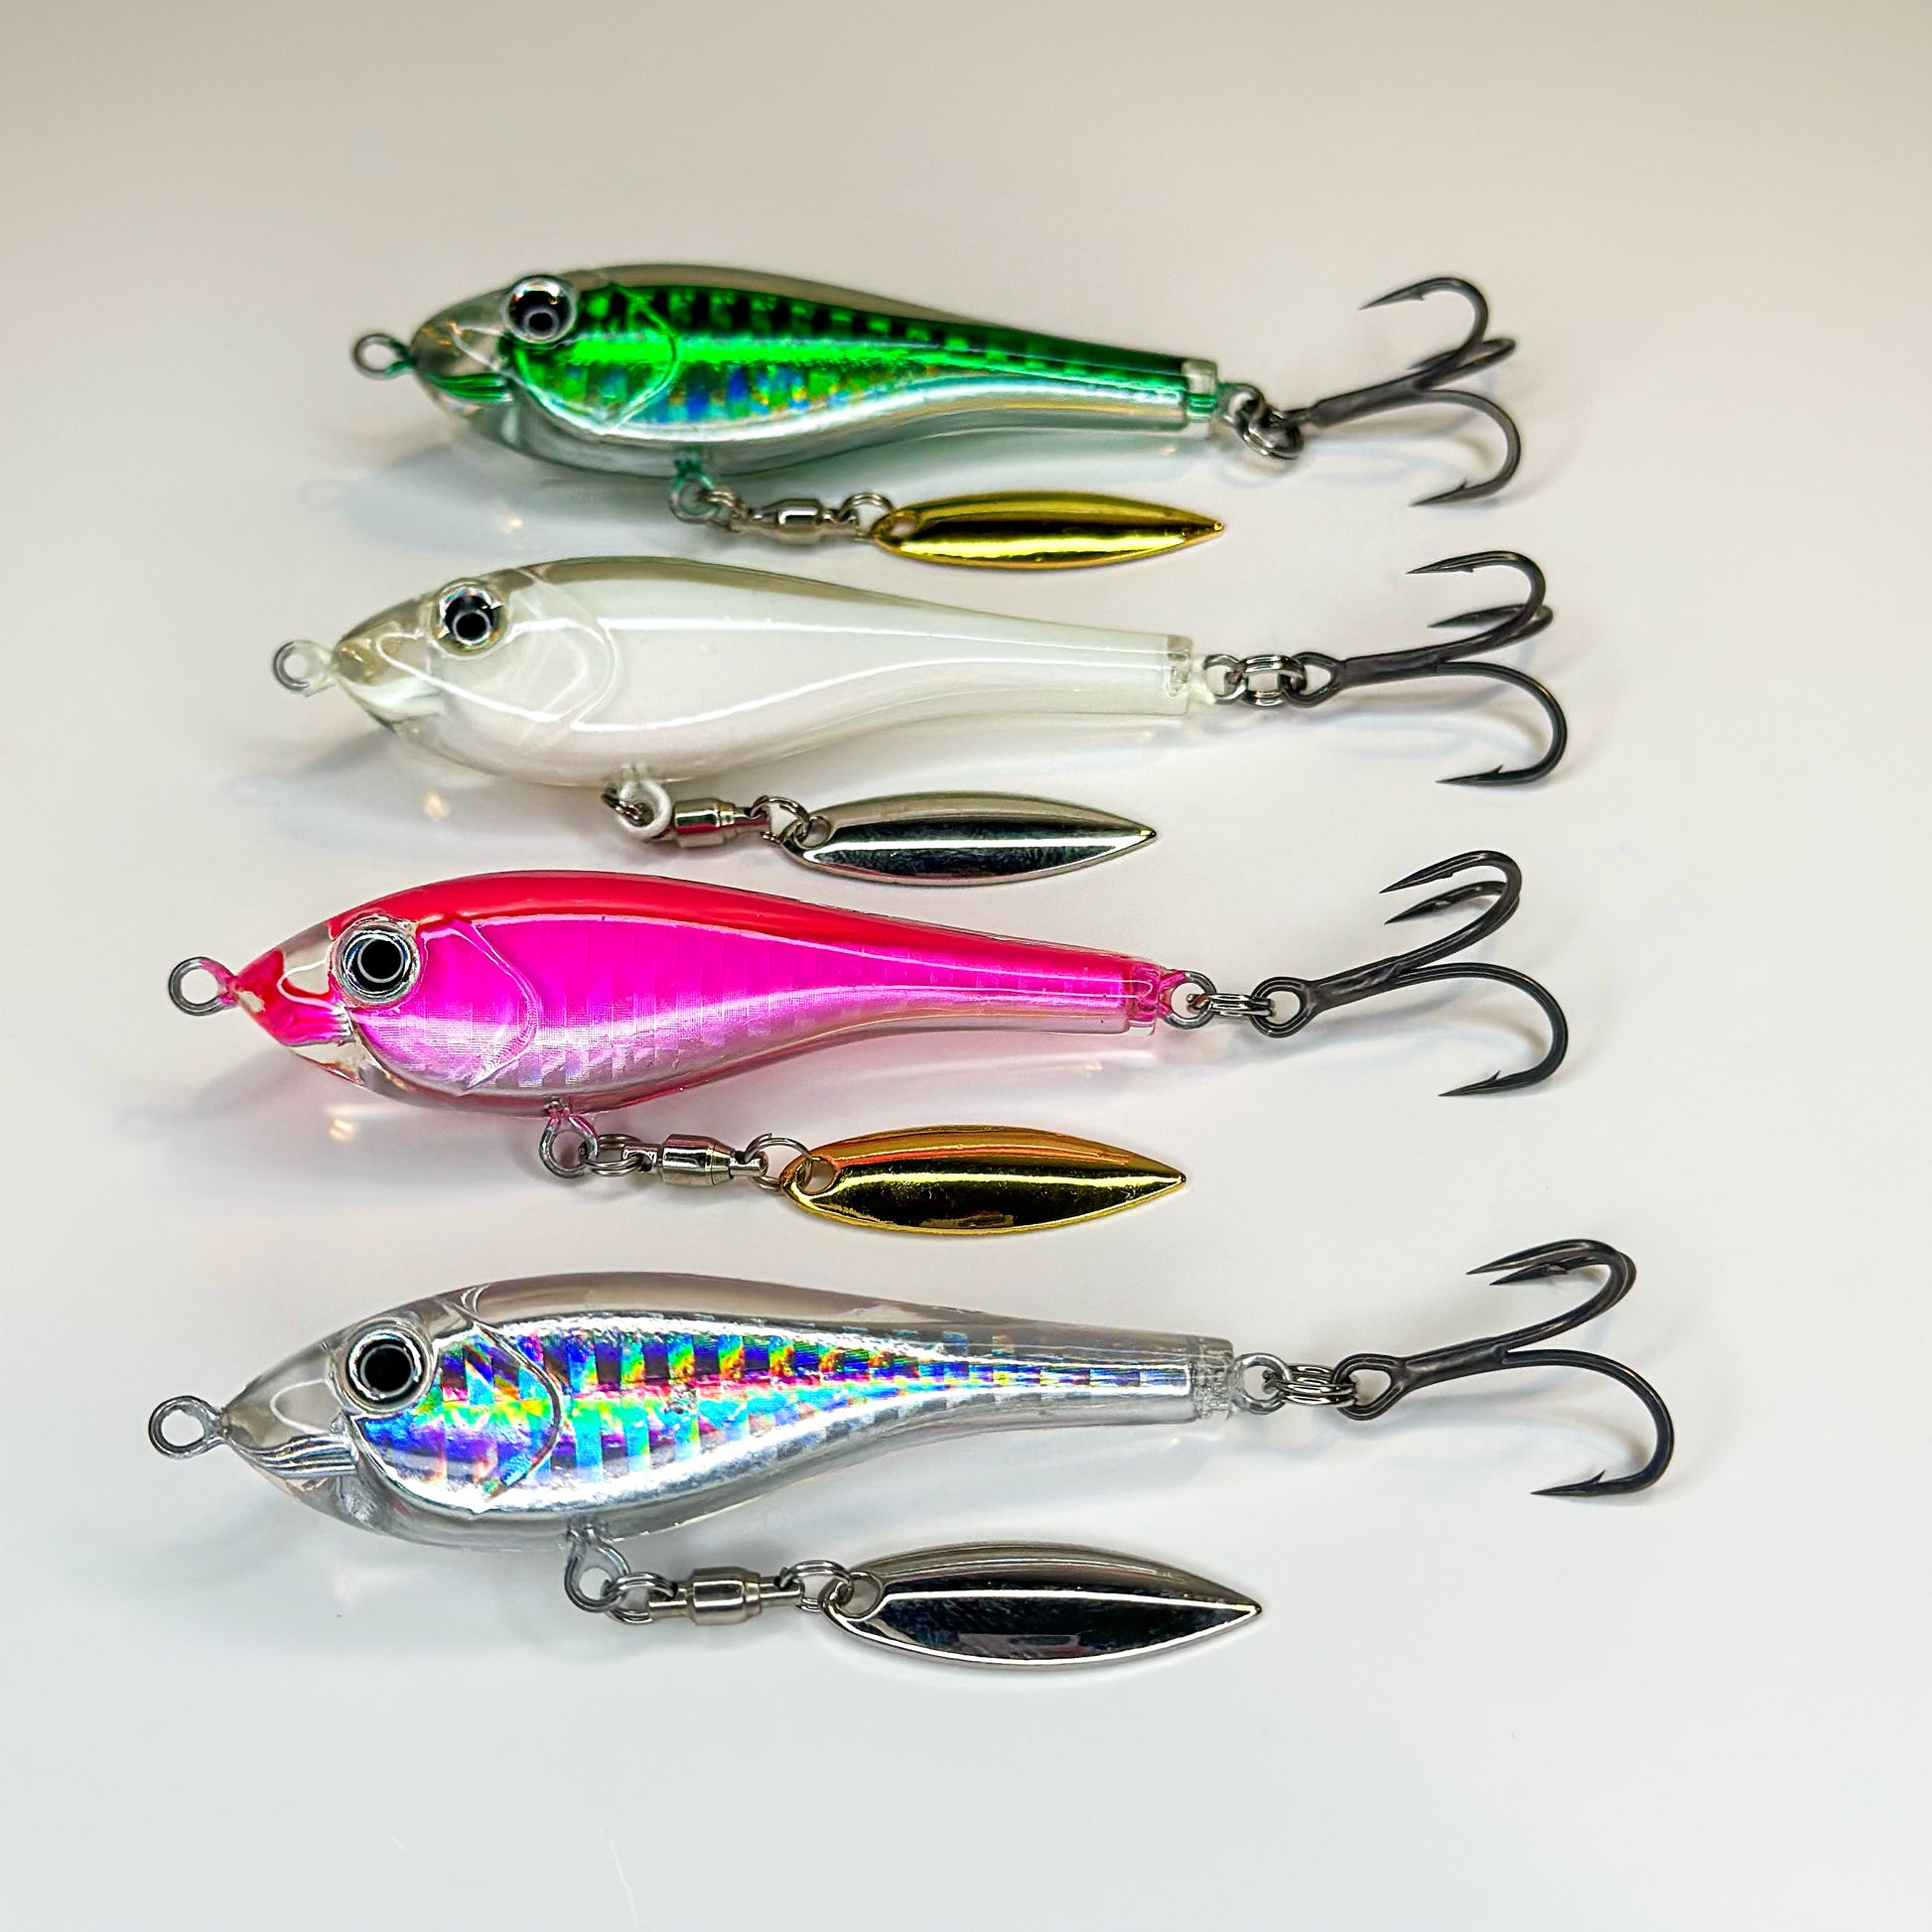 The Albie Daddy - Hot Pink – UVTFishing